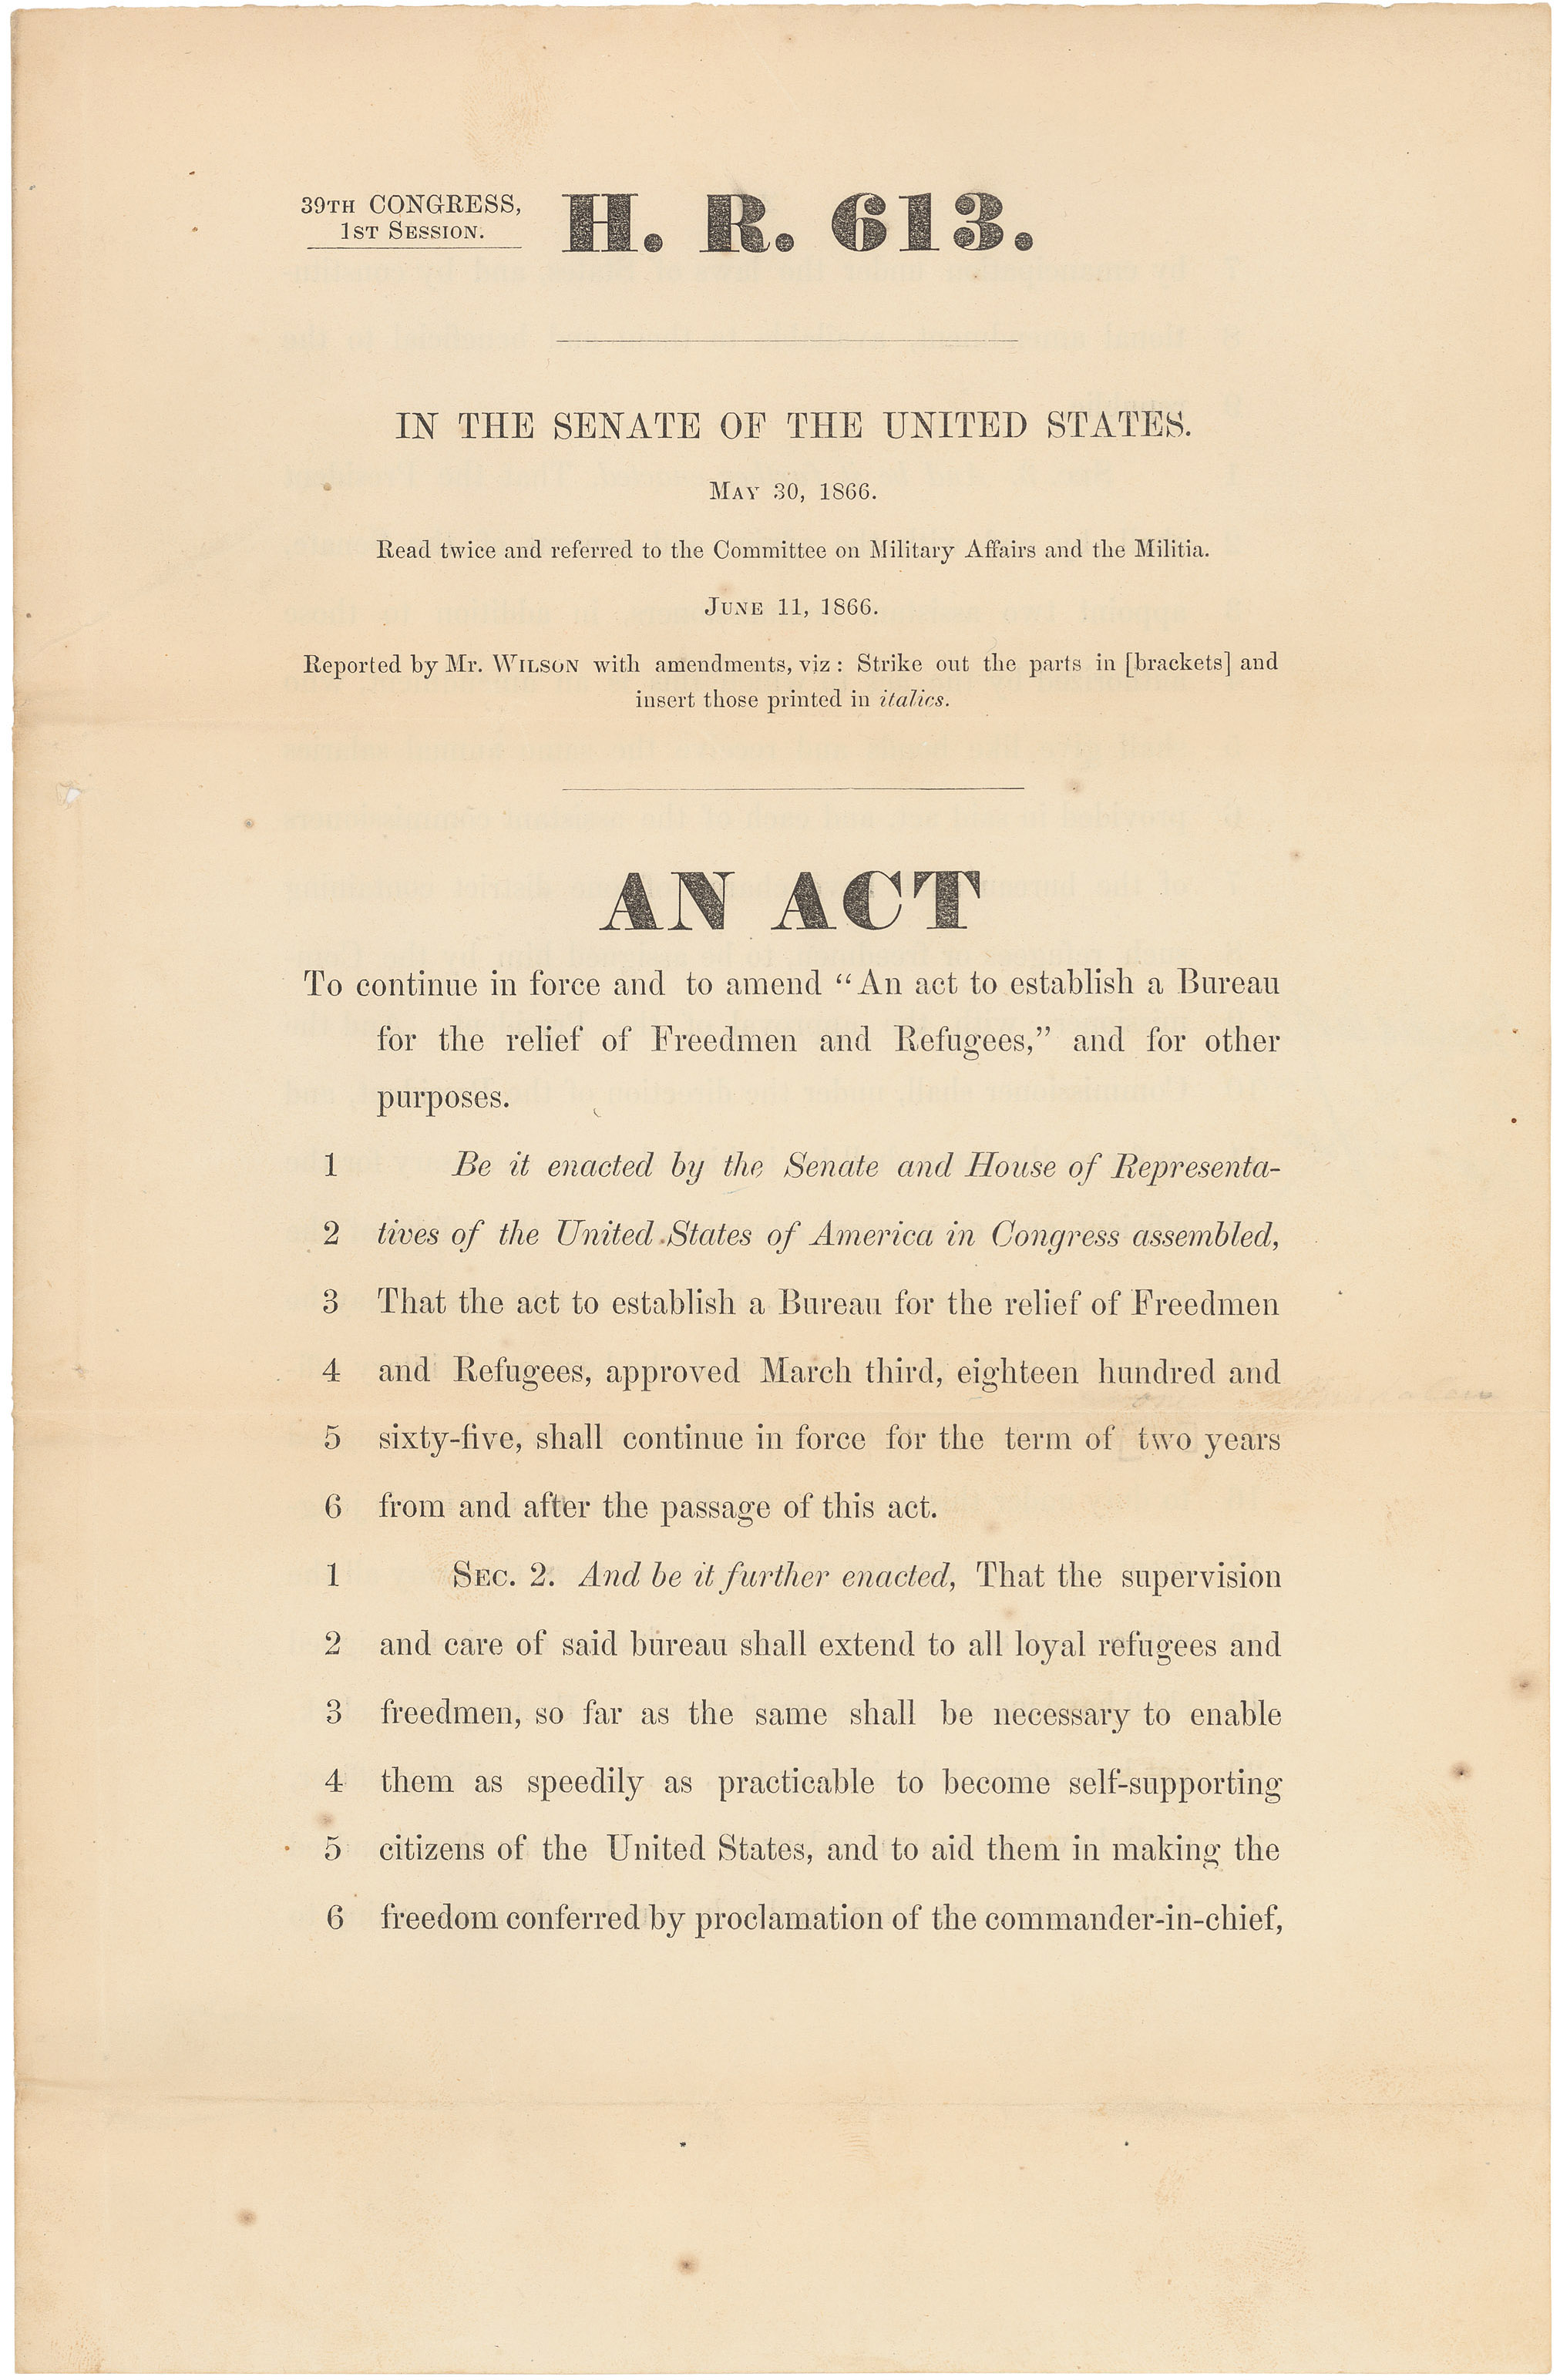 act of congress to renew and strengthen the freedmen's bureau